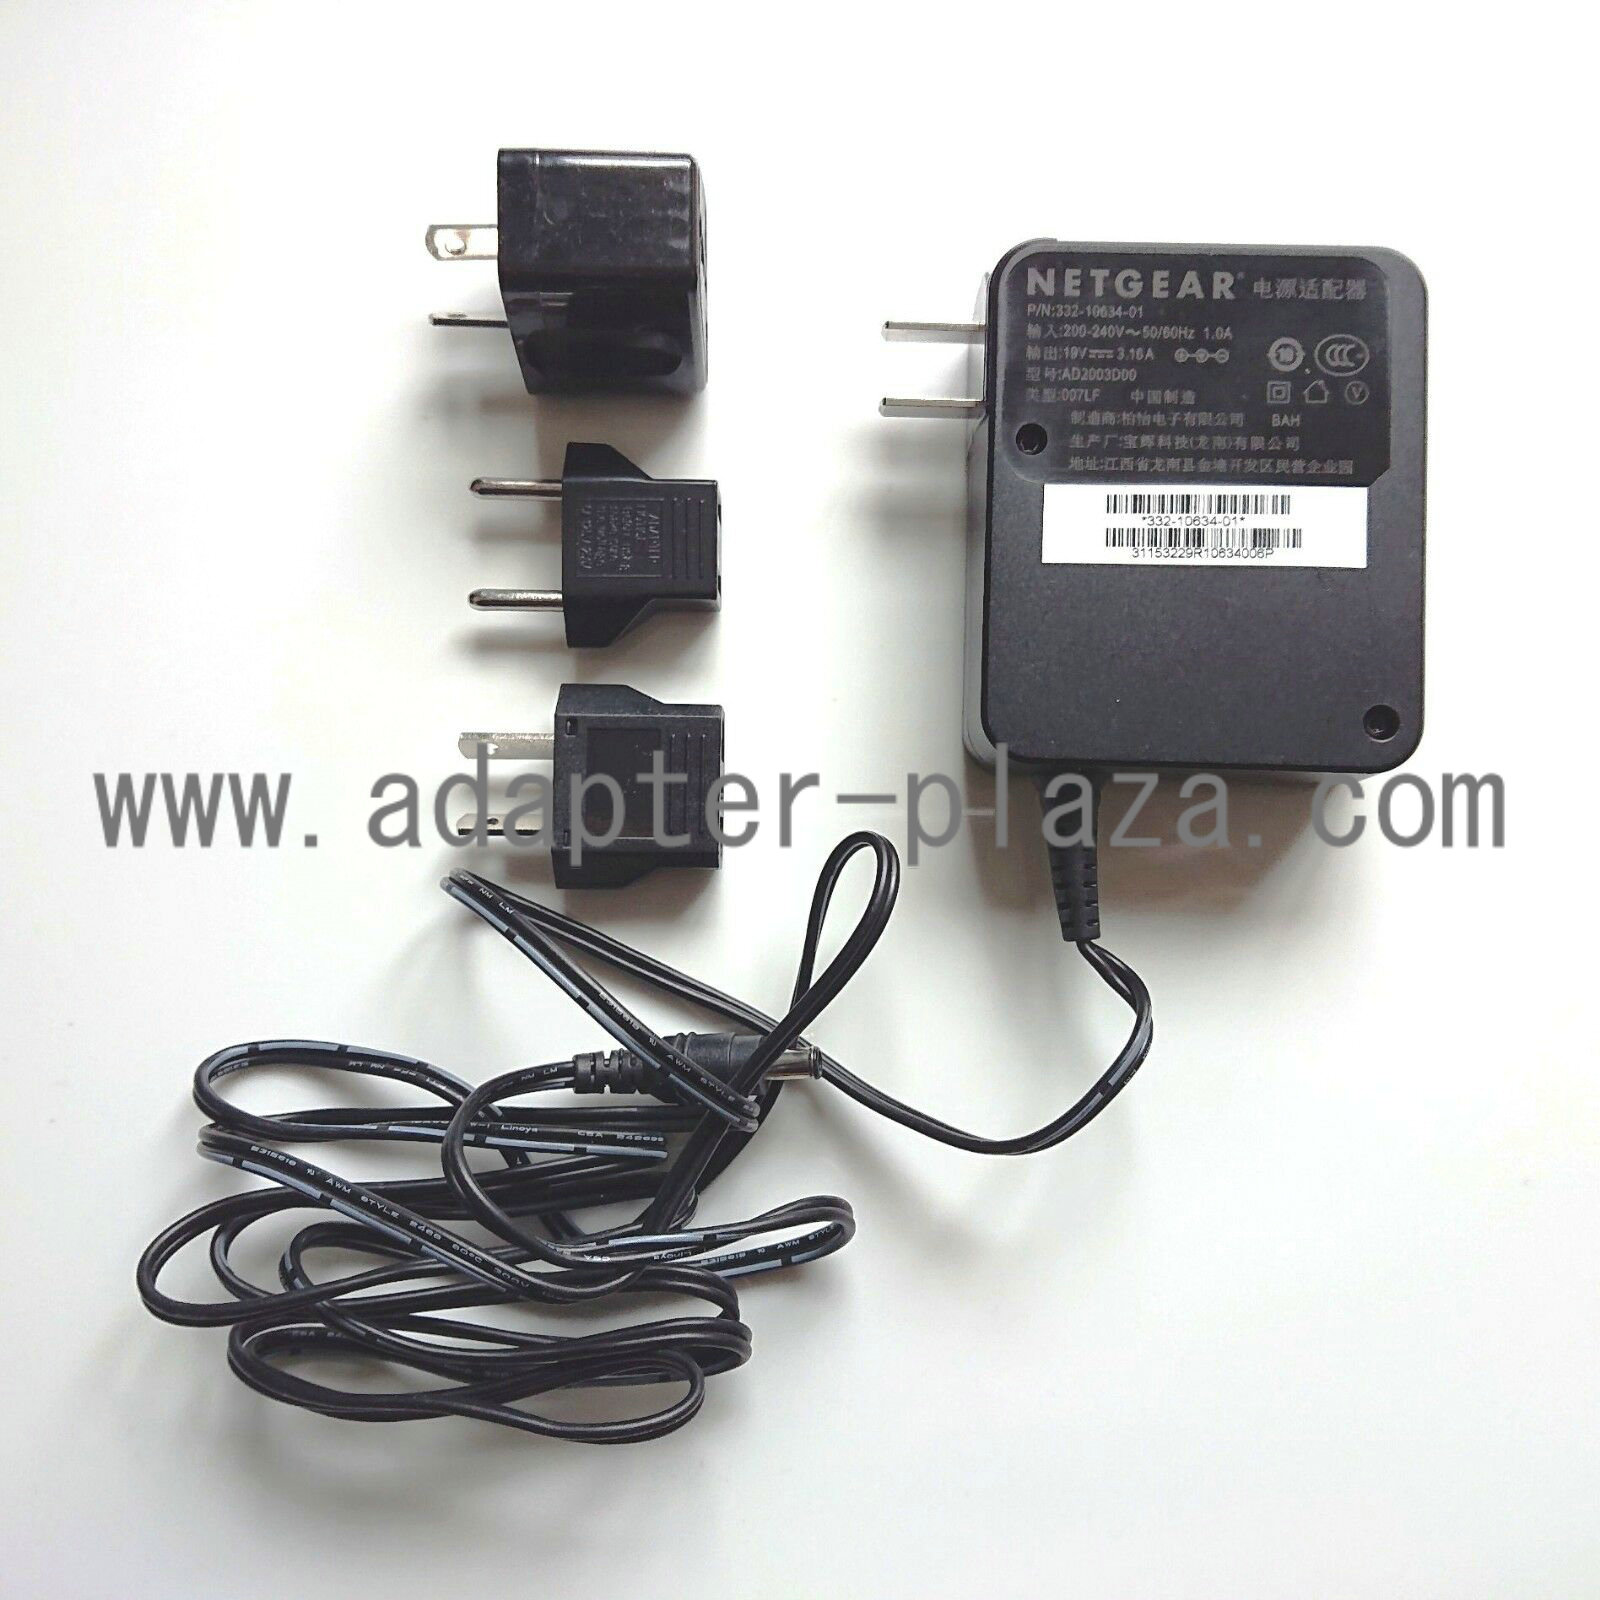 Brand New 19V 3.16A AD2003000 332-10634-01 power adapter for NETGEAR Wifi Router R8500 R8000 X8 AC5300 R9000